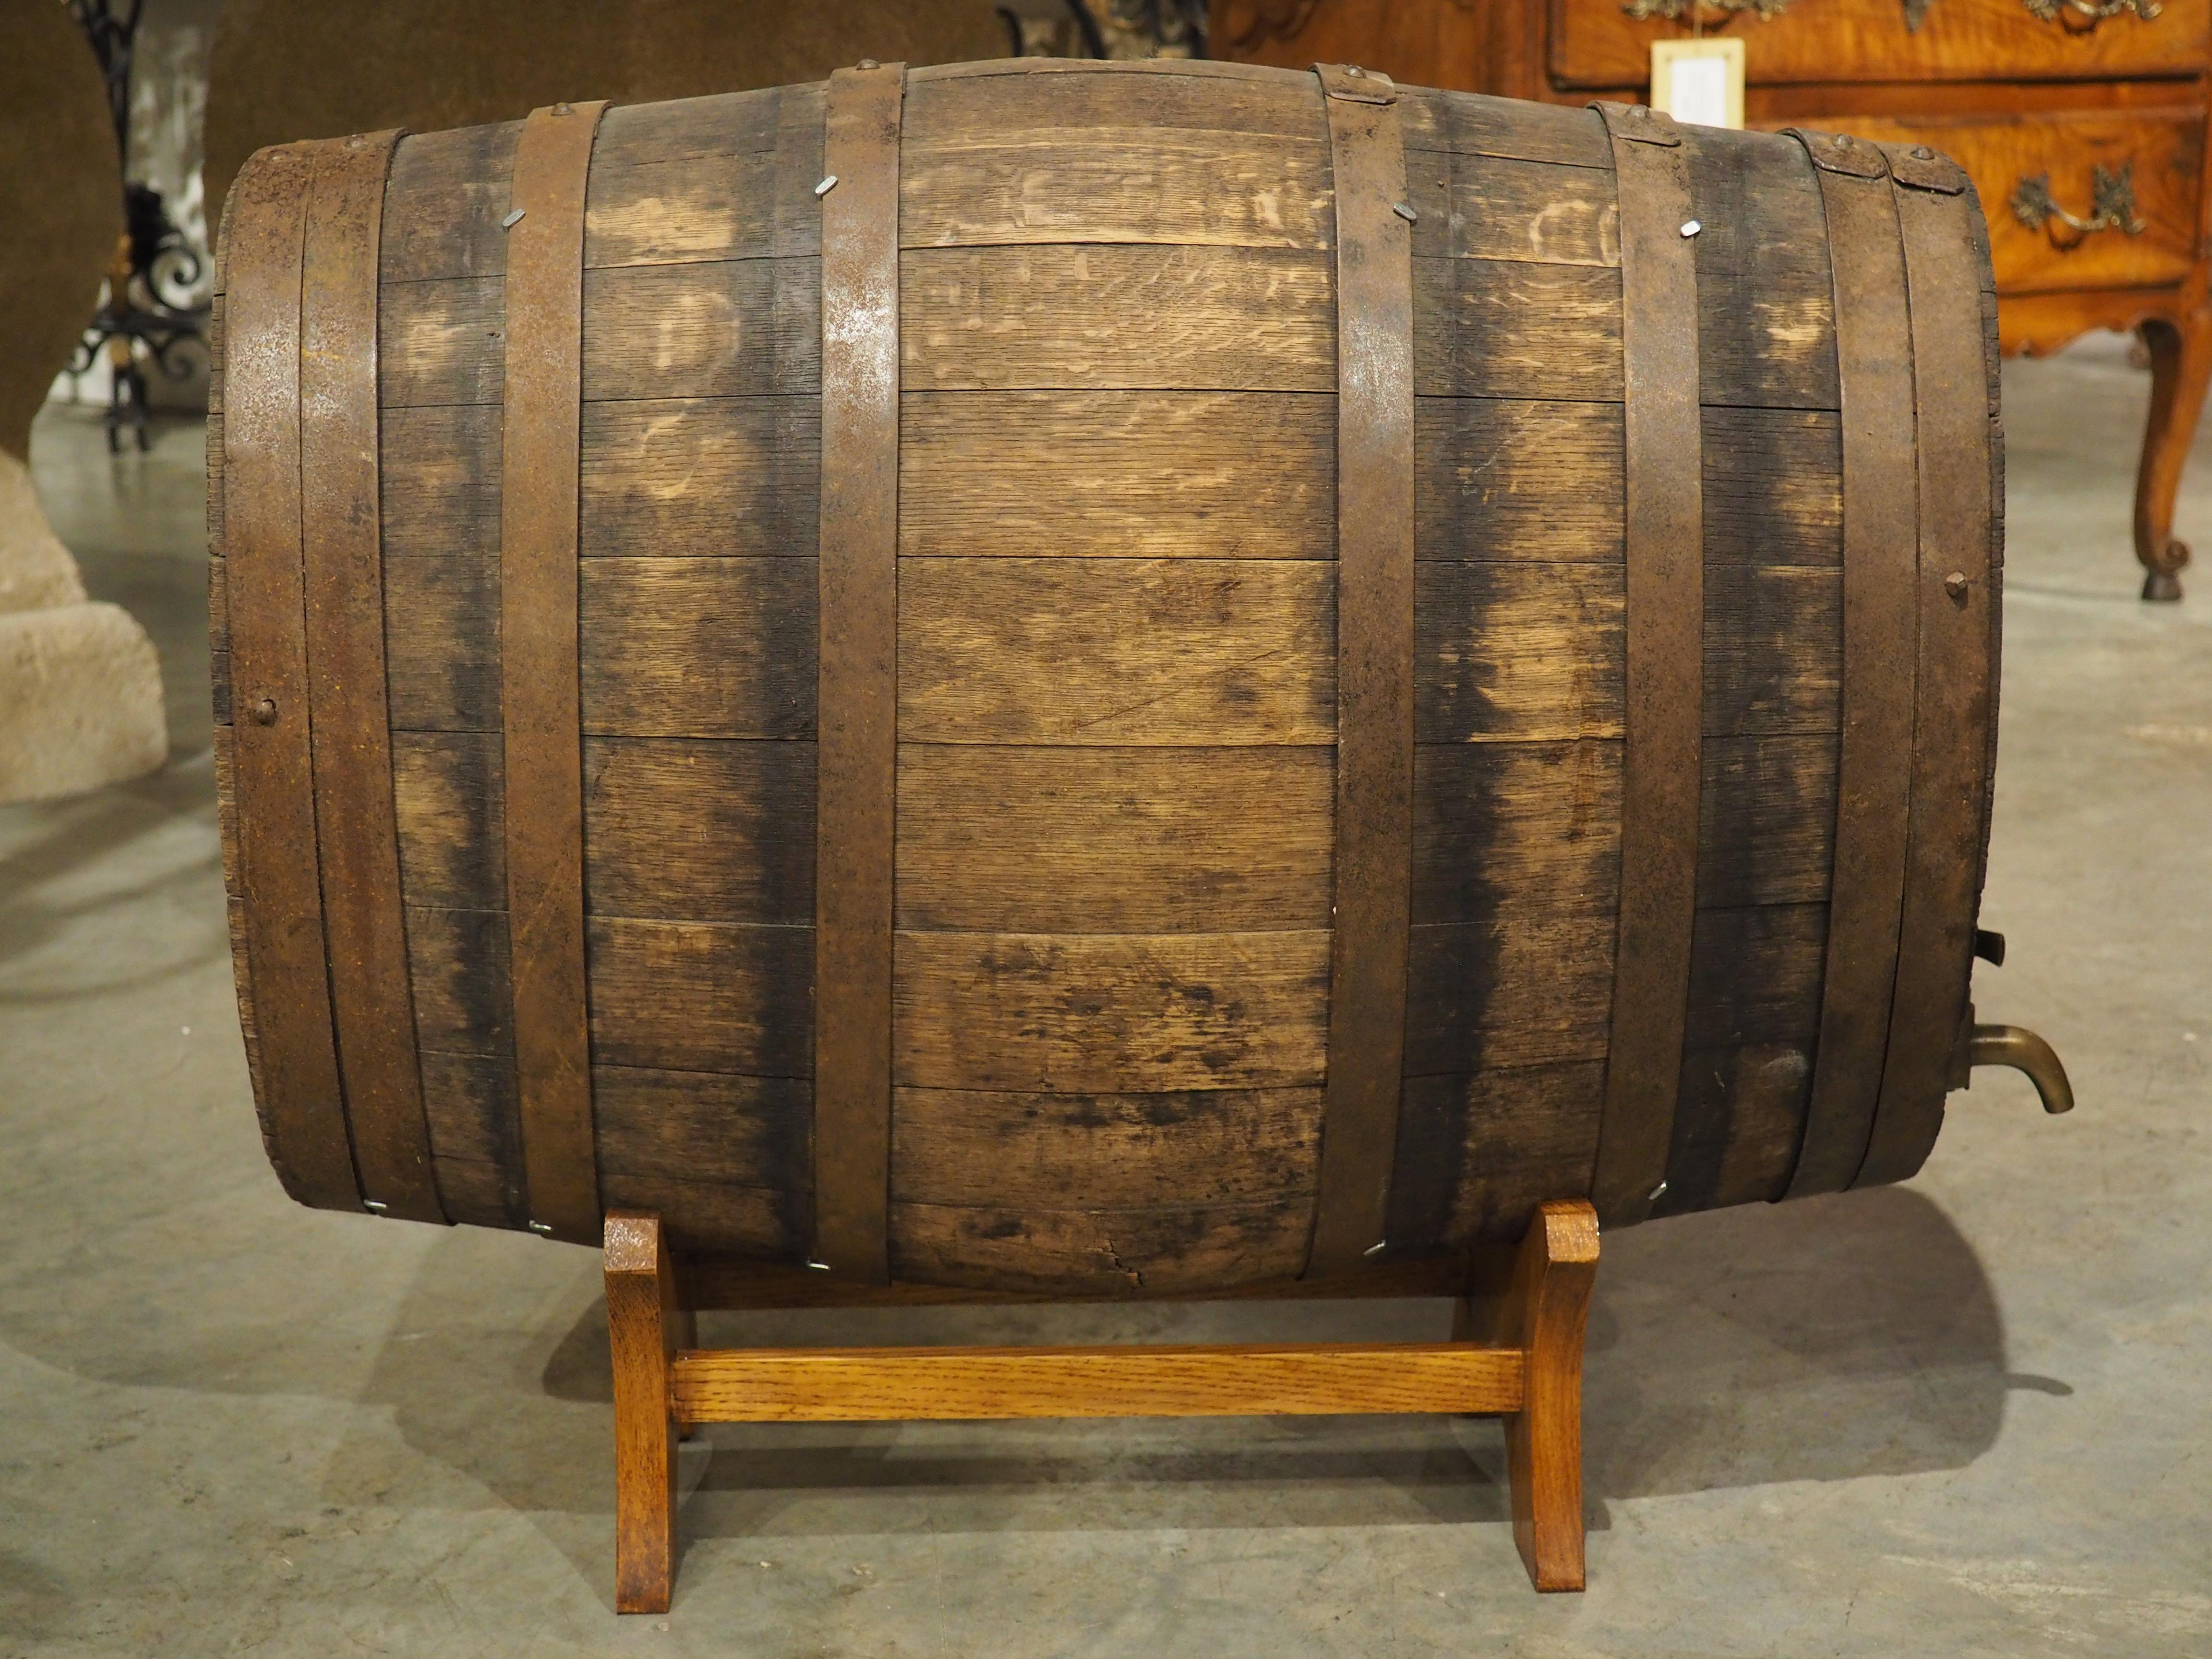 Antique Oak Calvados Barrel on Stand from Normandy, Circa 1850 For Sale 1